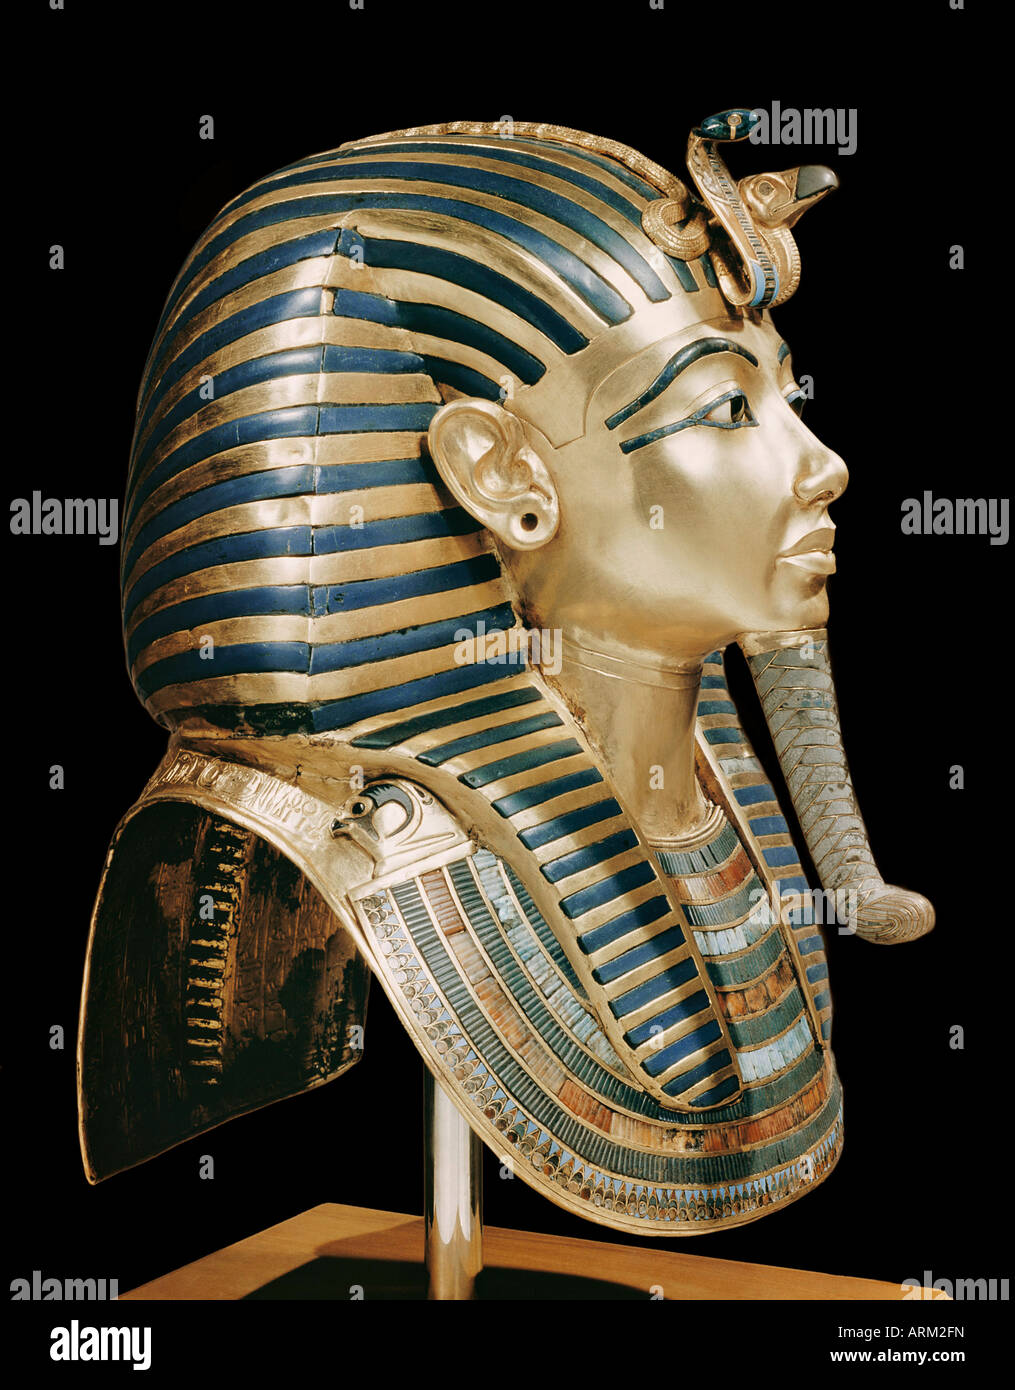 Tutankhamun's funeral mask in solid gold inlaid with semi-precious stones, from the tomb of the pharaoh Tutankhamun Stock Photo